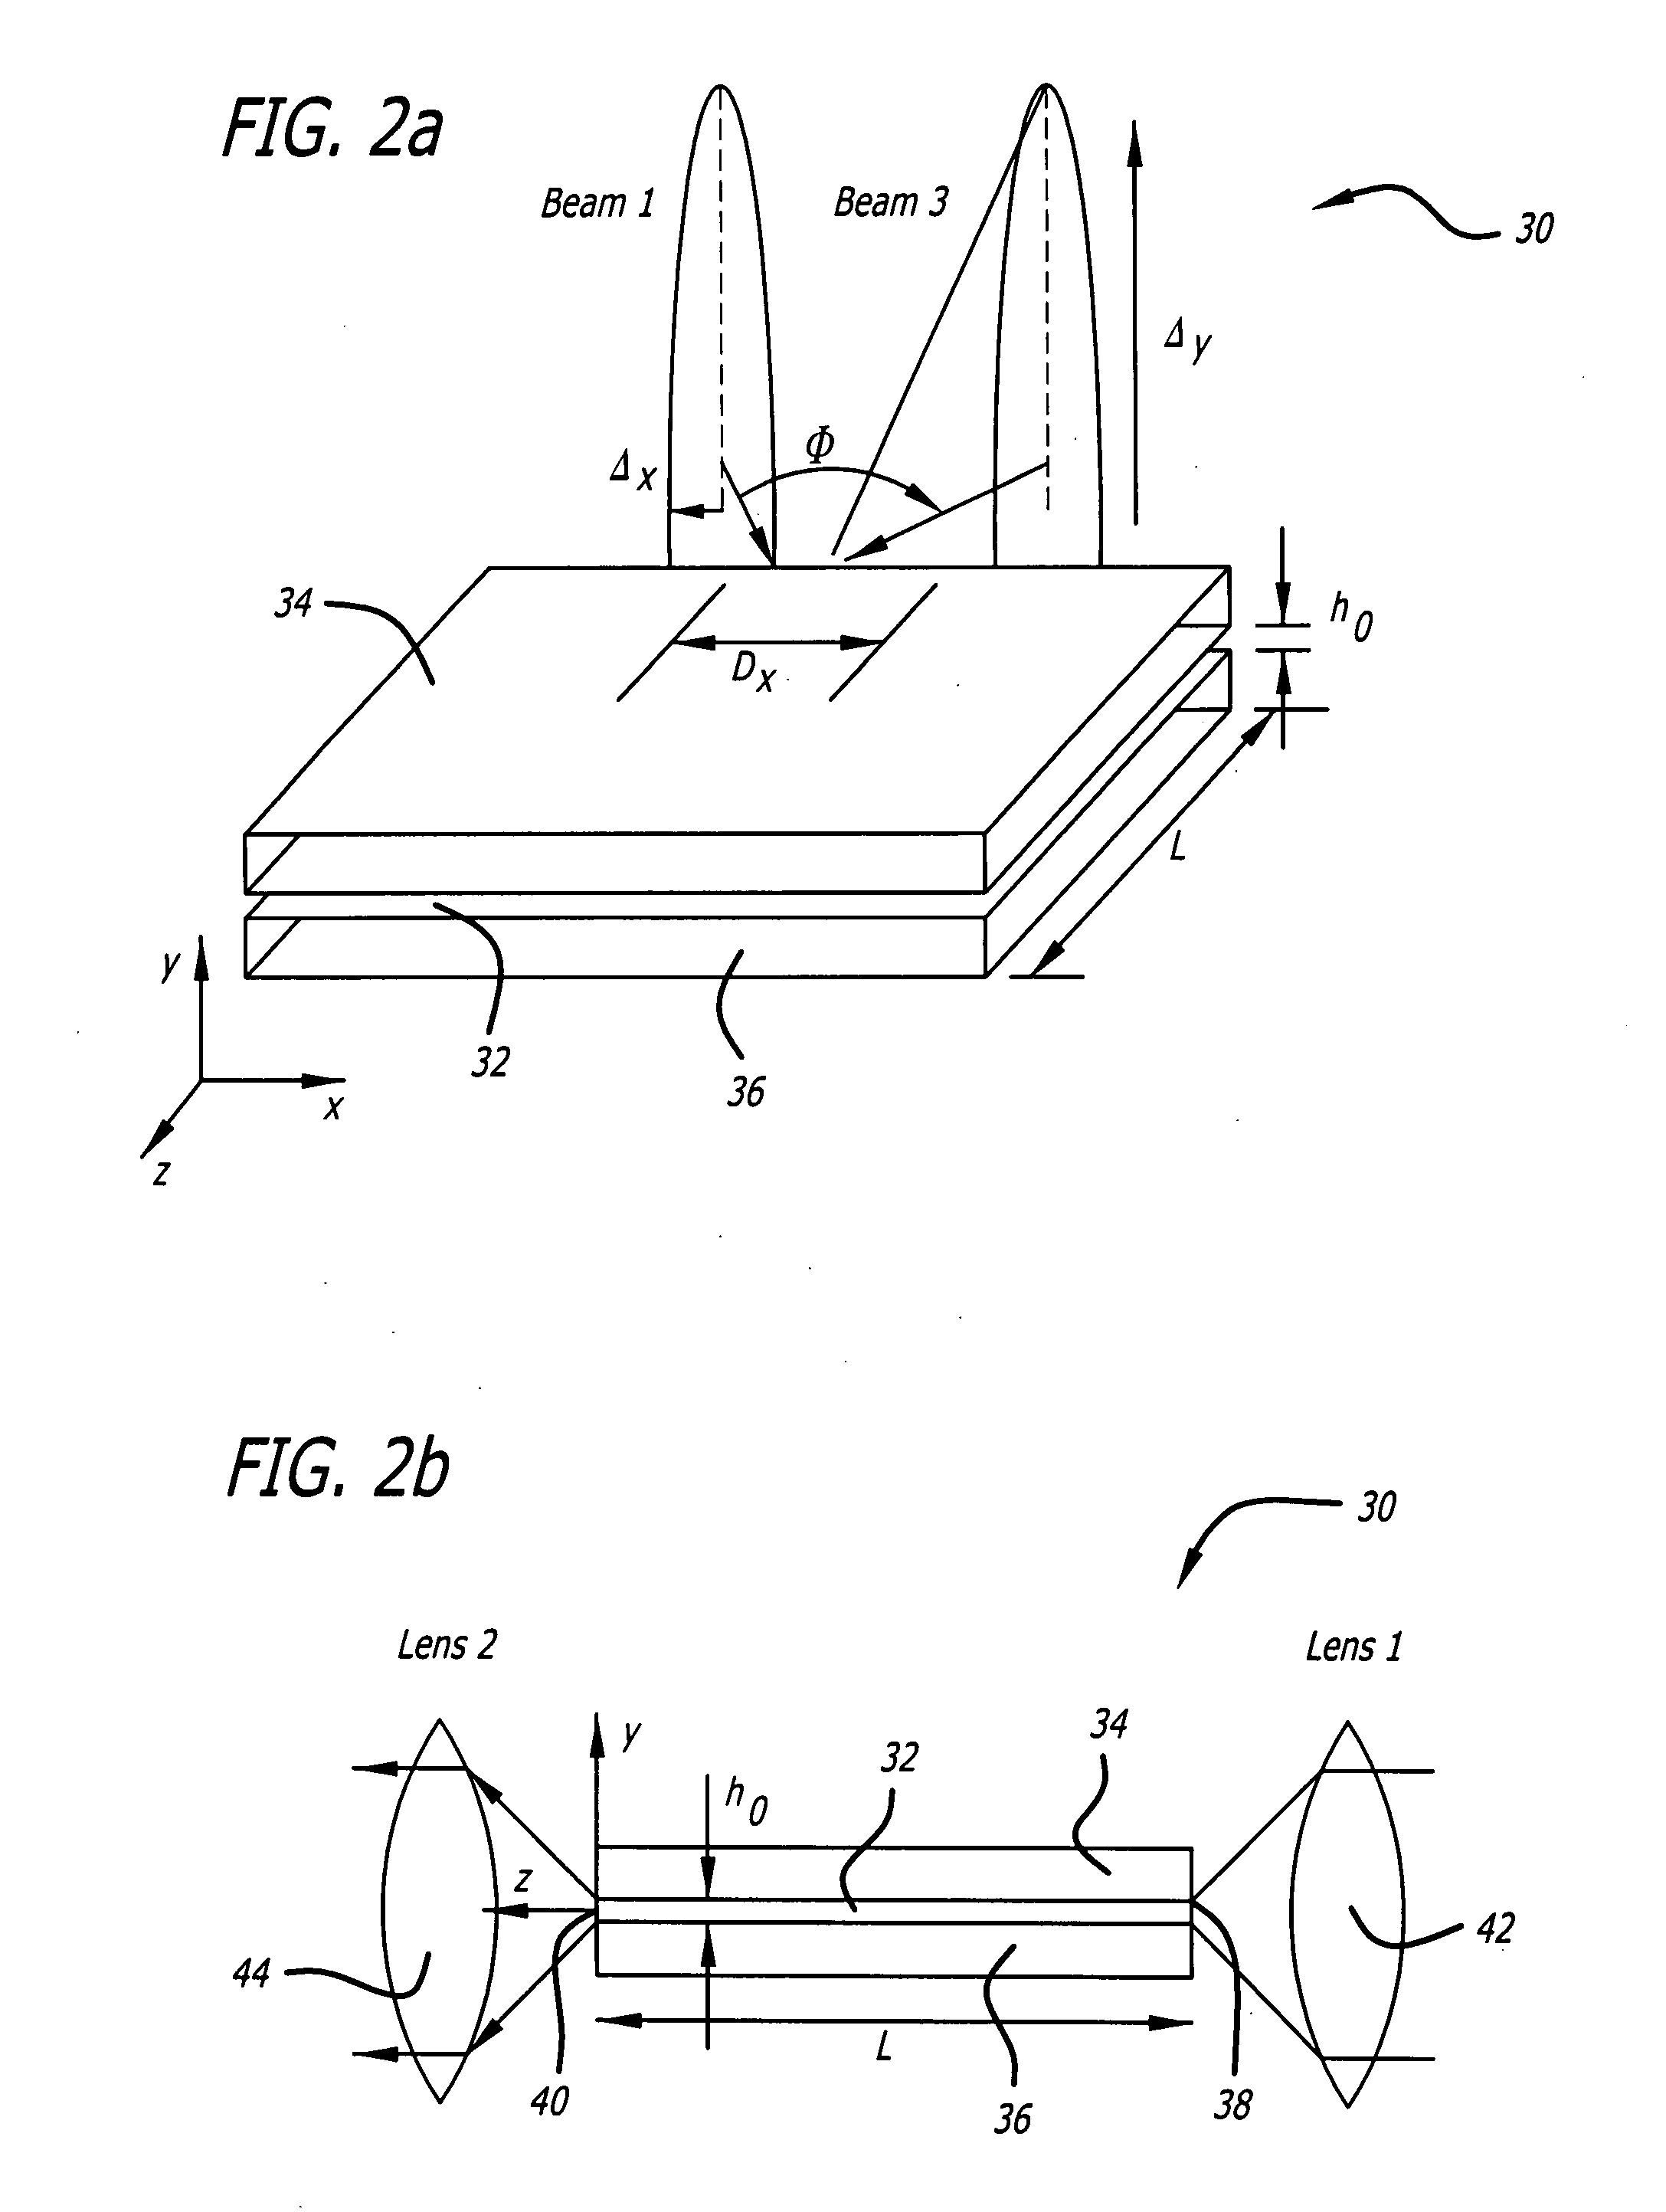 Guided thermal nonlinearity cell